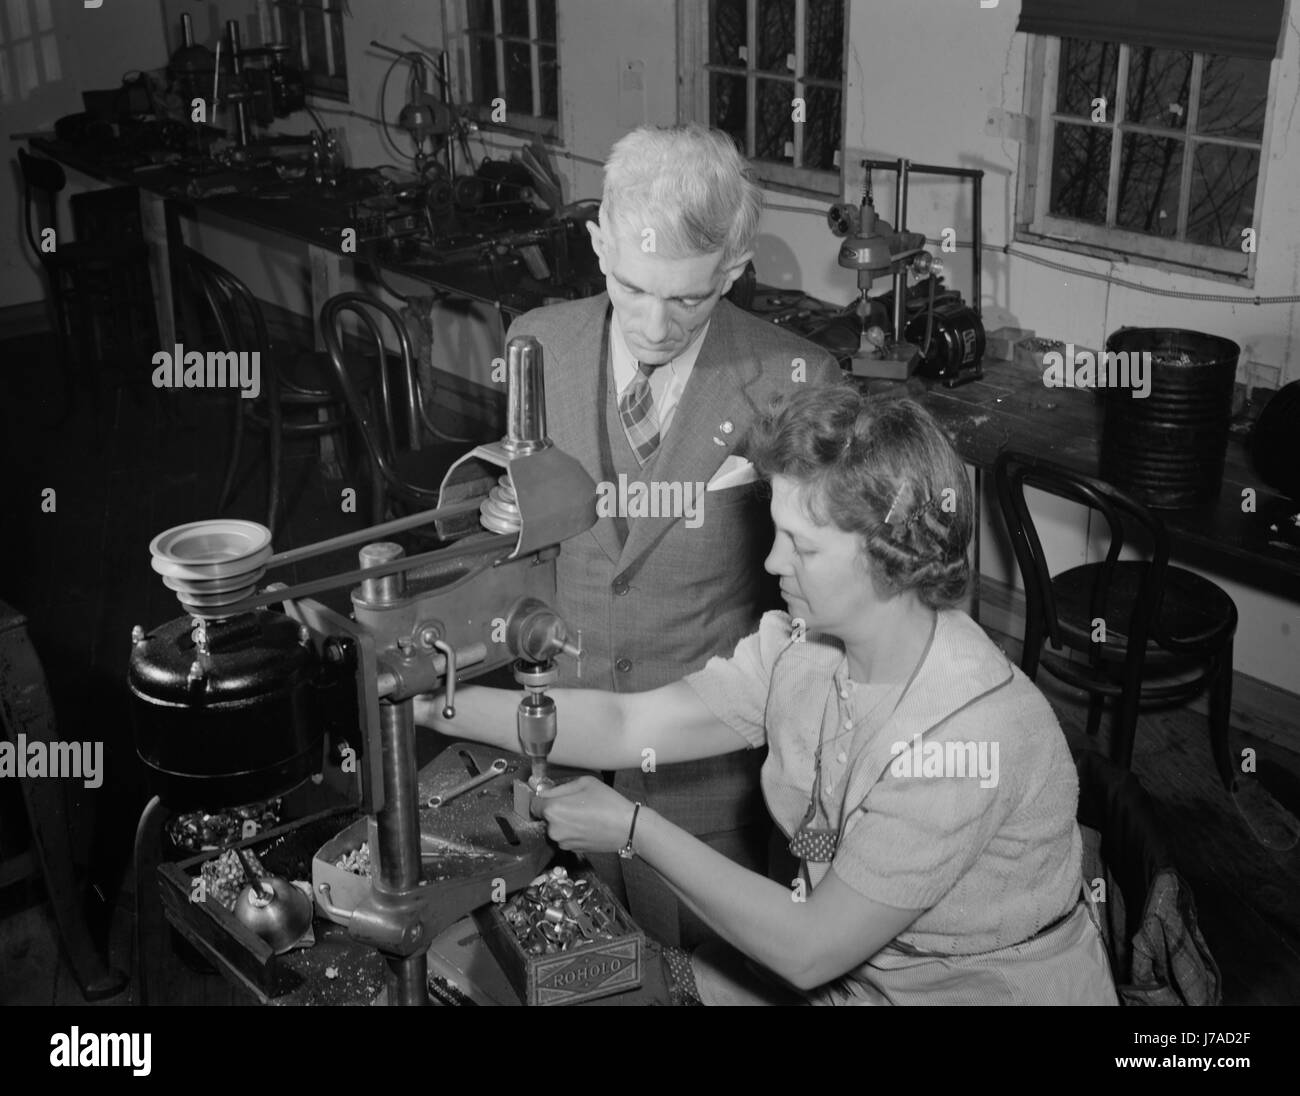 A woman machinist places screws into electric terminal as her supervisor looks on, 1942. Stock Photo